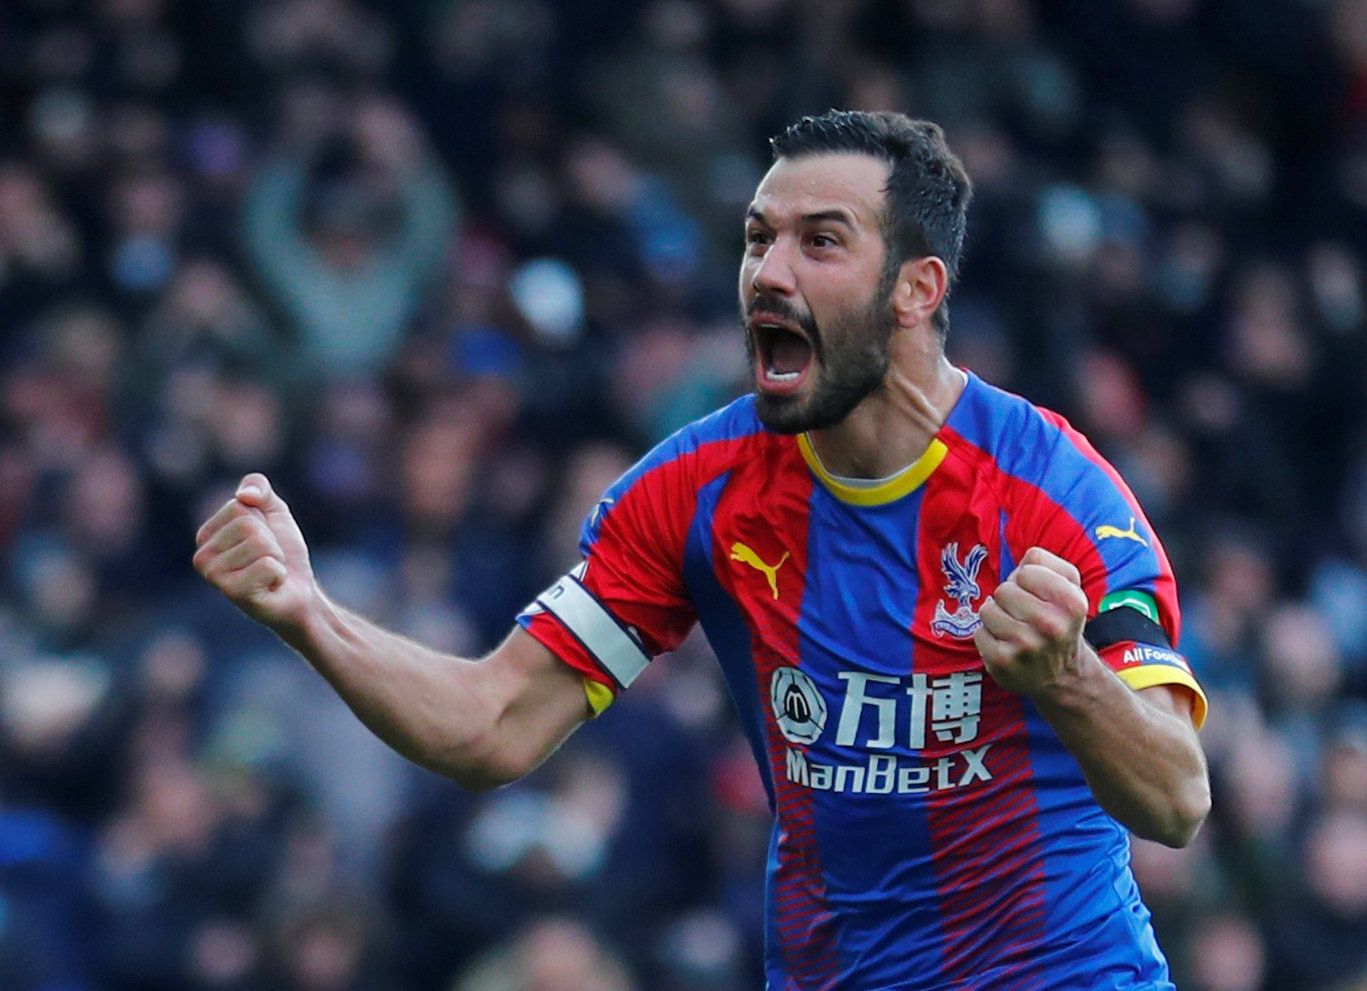 Soccer Football - Premier League - Crystal Palace v Arsenal - Selhurst Park, London, Britain - October 28, 2018  Crystal Palace's Luka Milivojevic celebrates scoring their second goal  REUTERS/Eddie Keogh  EDITORIAL USE ONLY. No use with unauthorized audio, video, data, fixture lists, club/league logos or "live" services. Online in-match use limited to 75 images, no video emulation. No use in betting, games or single club/league/player publications.  Please contact your account representative fo